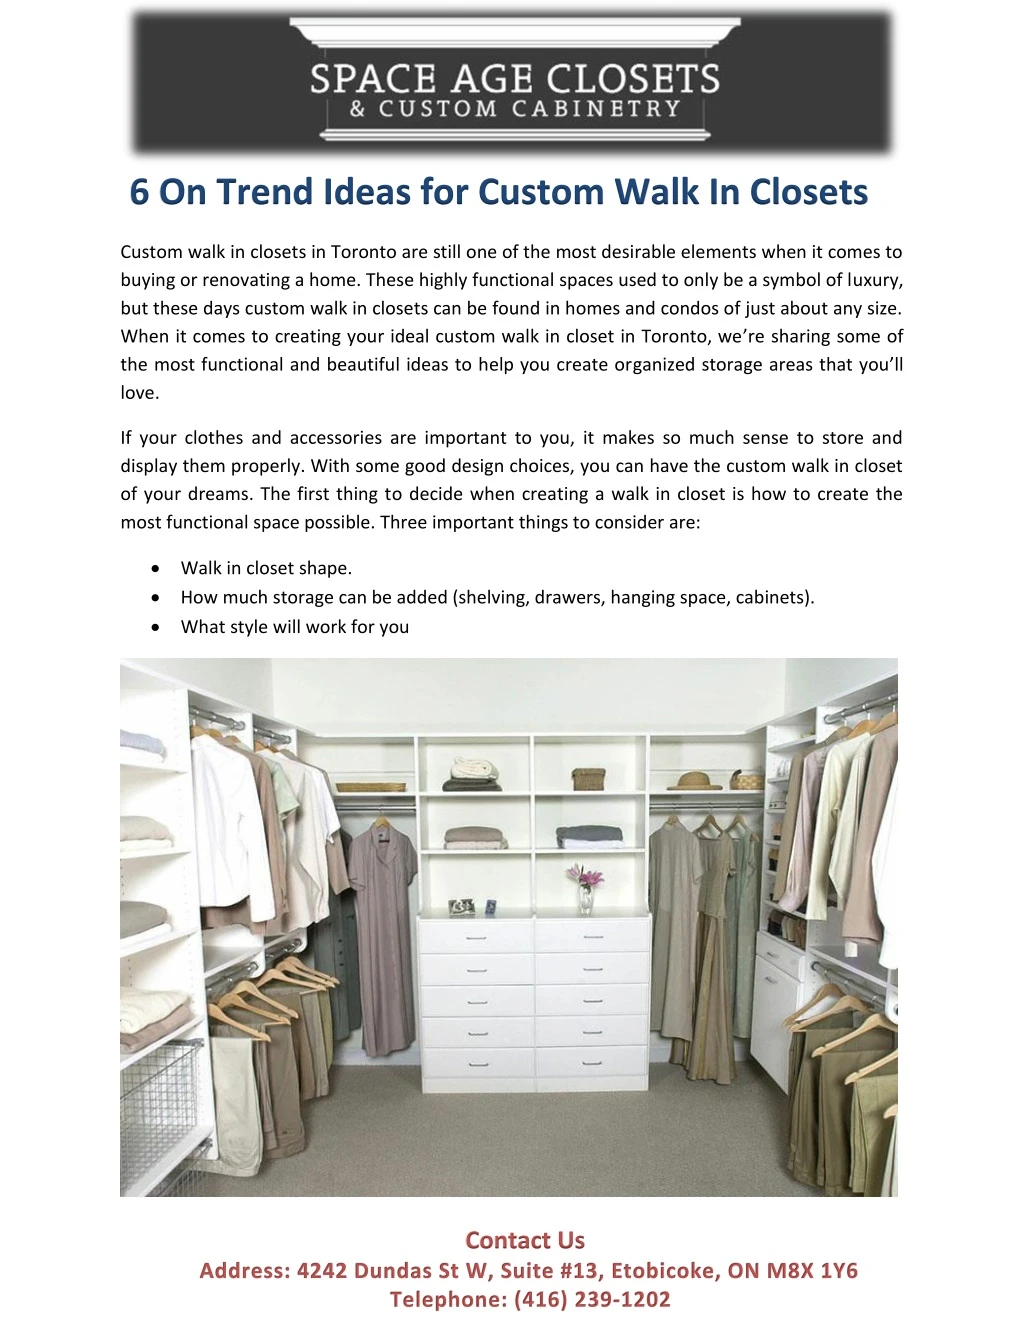 6 on trend ideas for custom walk in closets